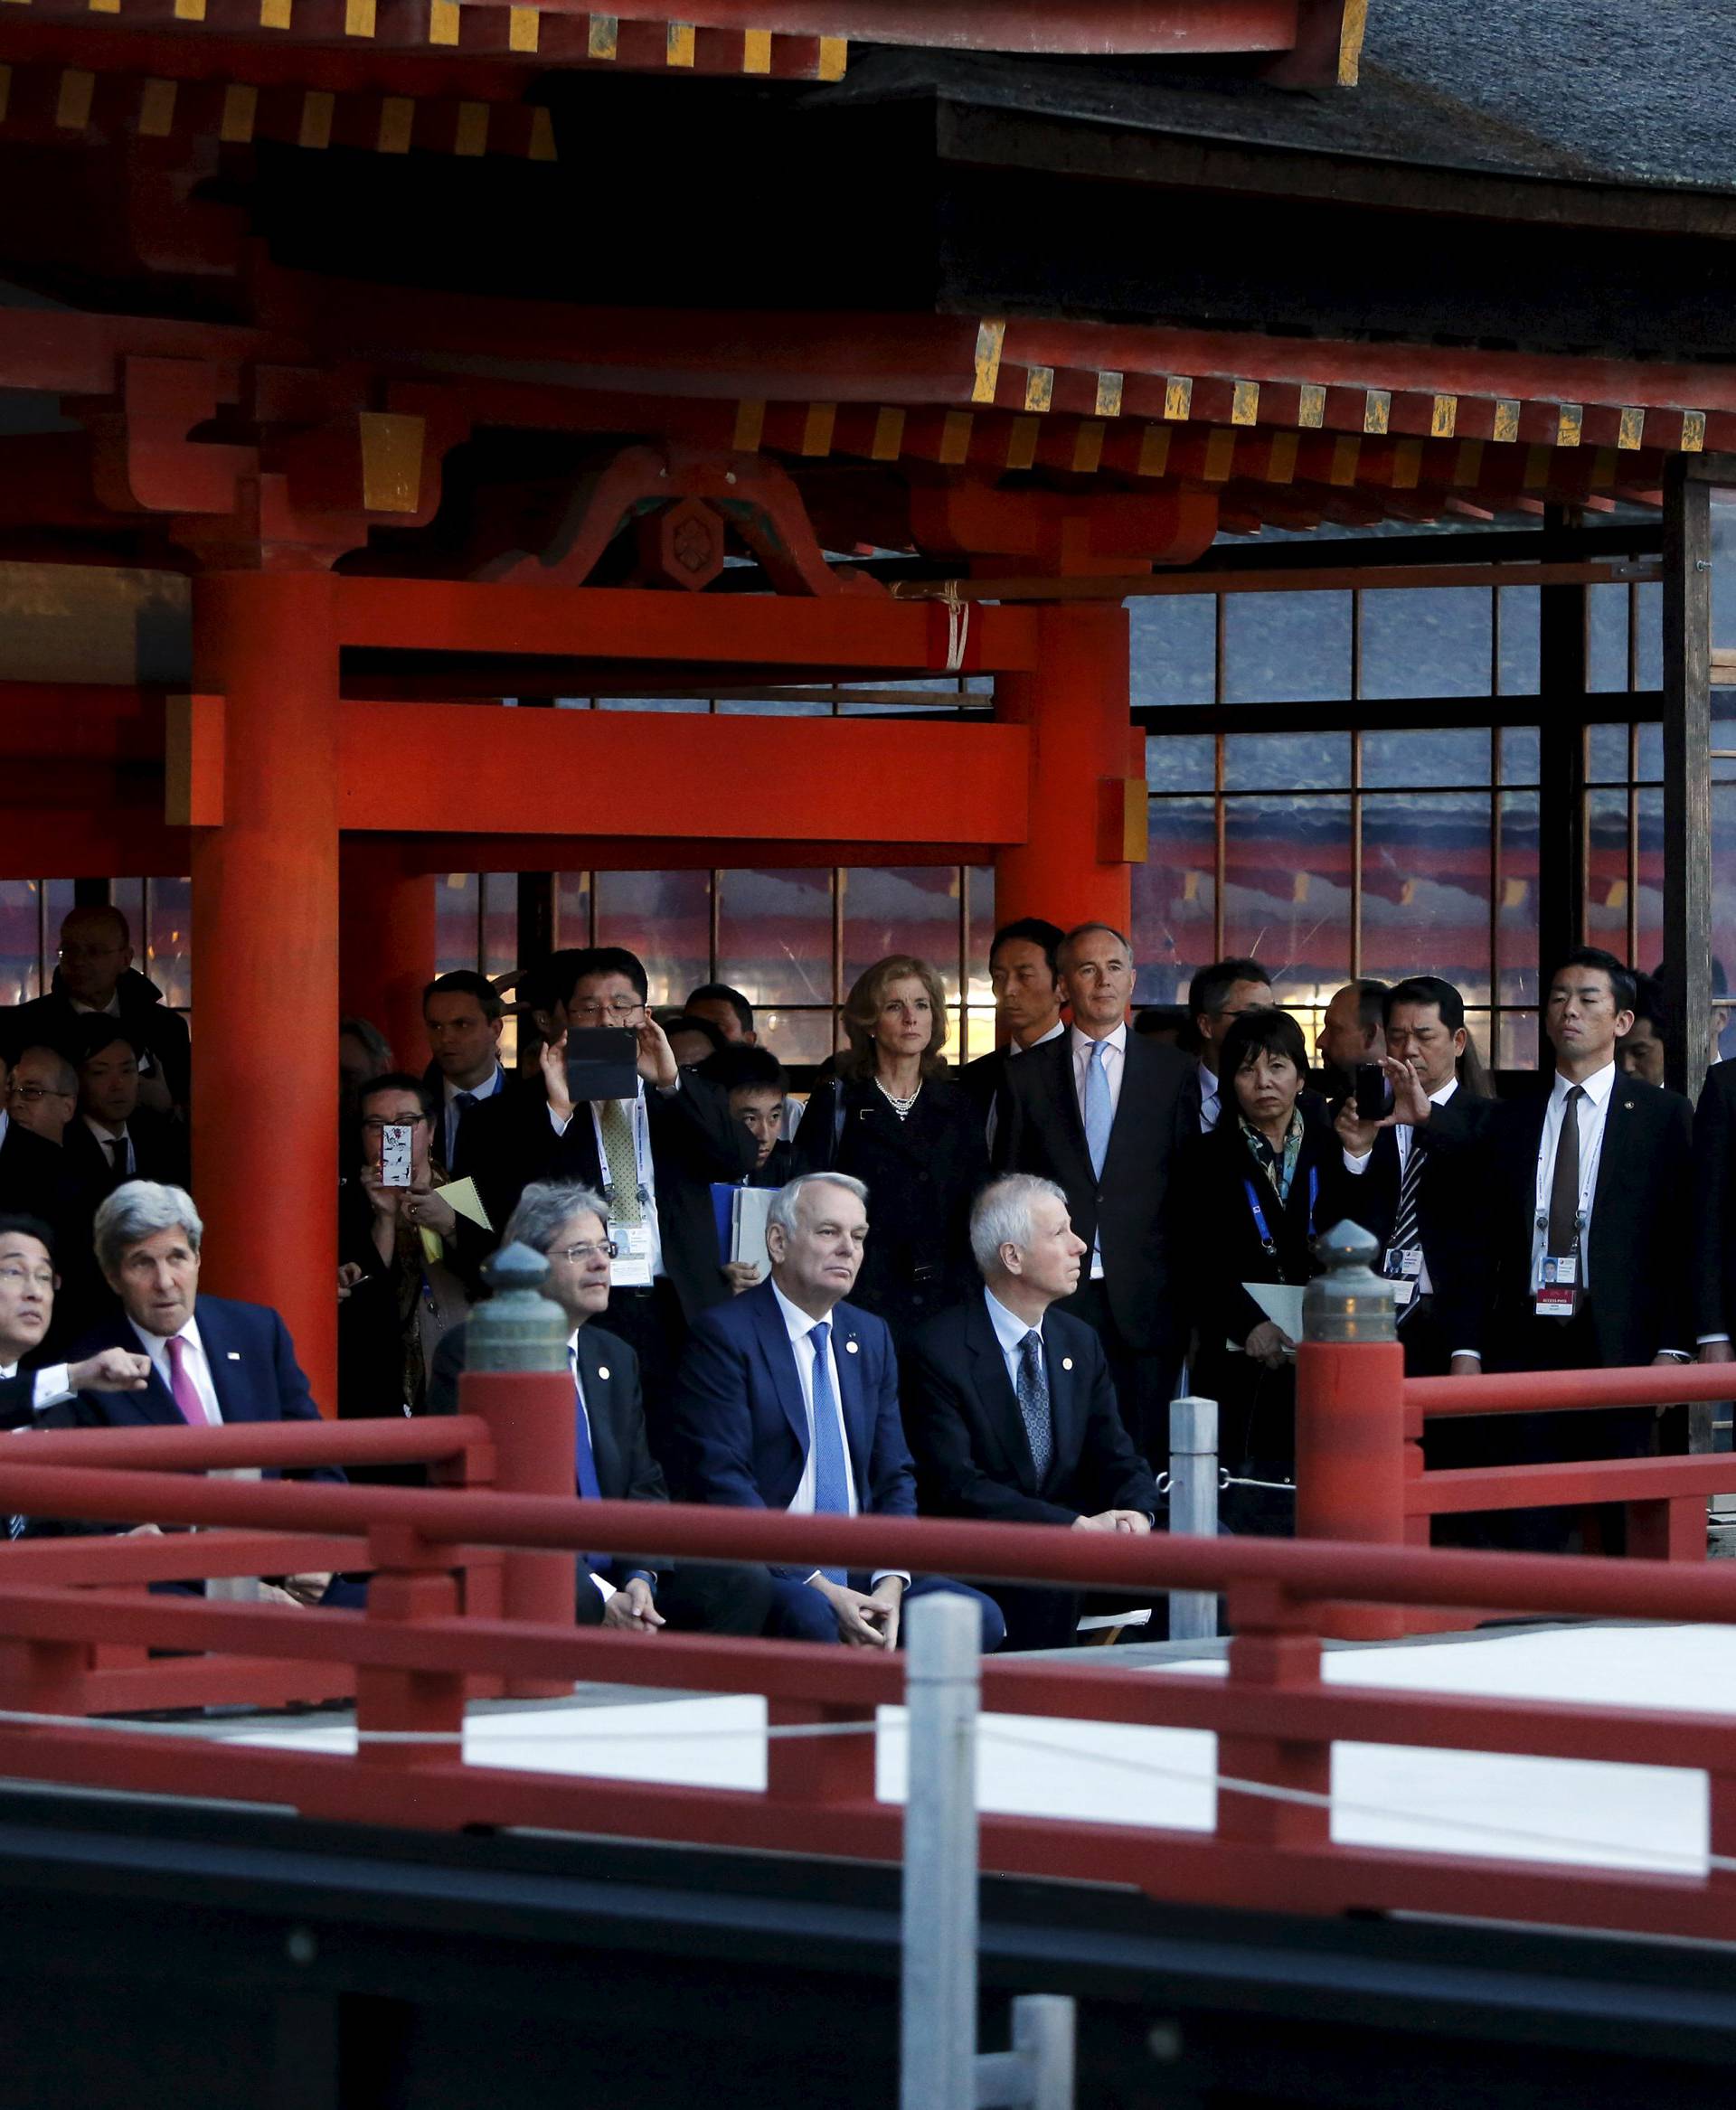 Kerry talks to Kishida during a ceremonial dance at the Itsukushima Shrine, as they and Hammond, Gentiloni, Ayrault and Dion take a cultural break from their G7 foreign minister meetings in nearby Hiroshima to visit Miyajima Island